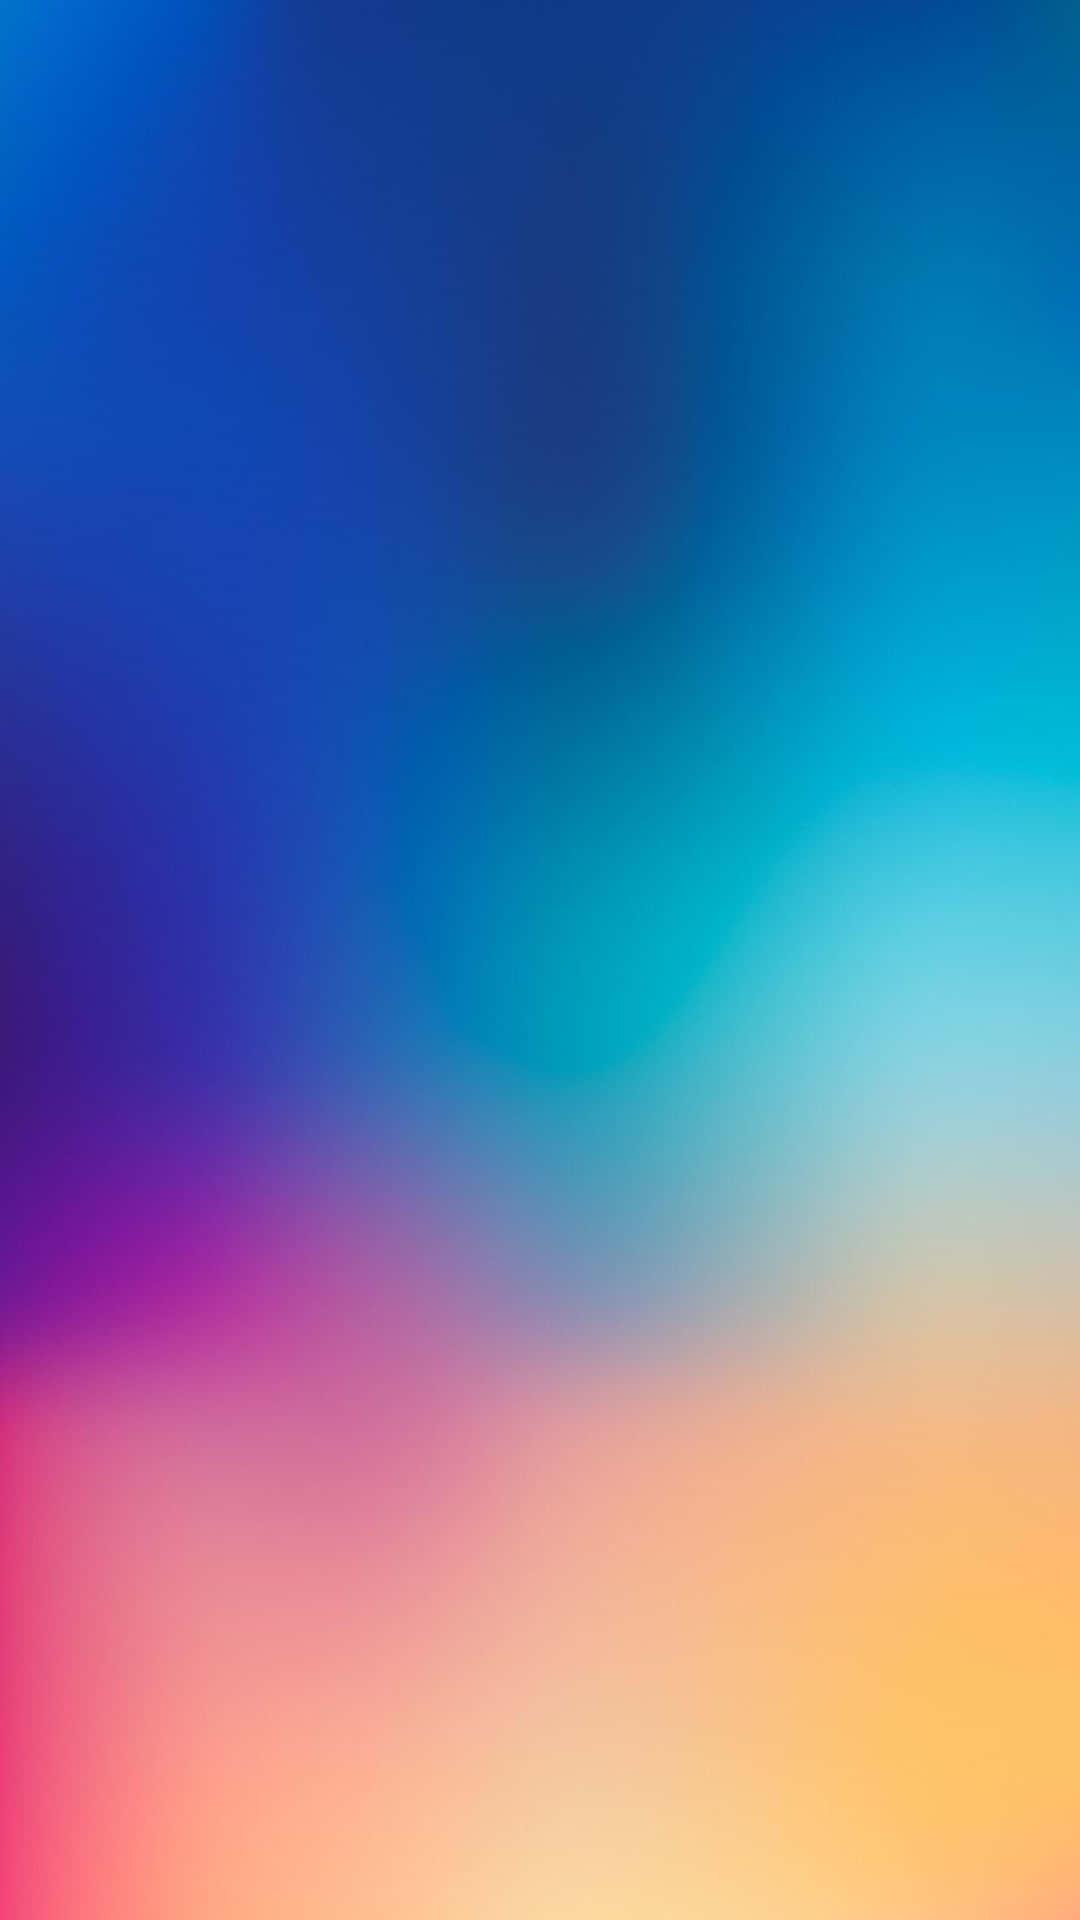 Cool and simple blue iPhone Wallpaper